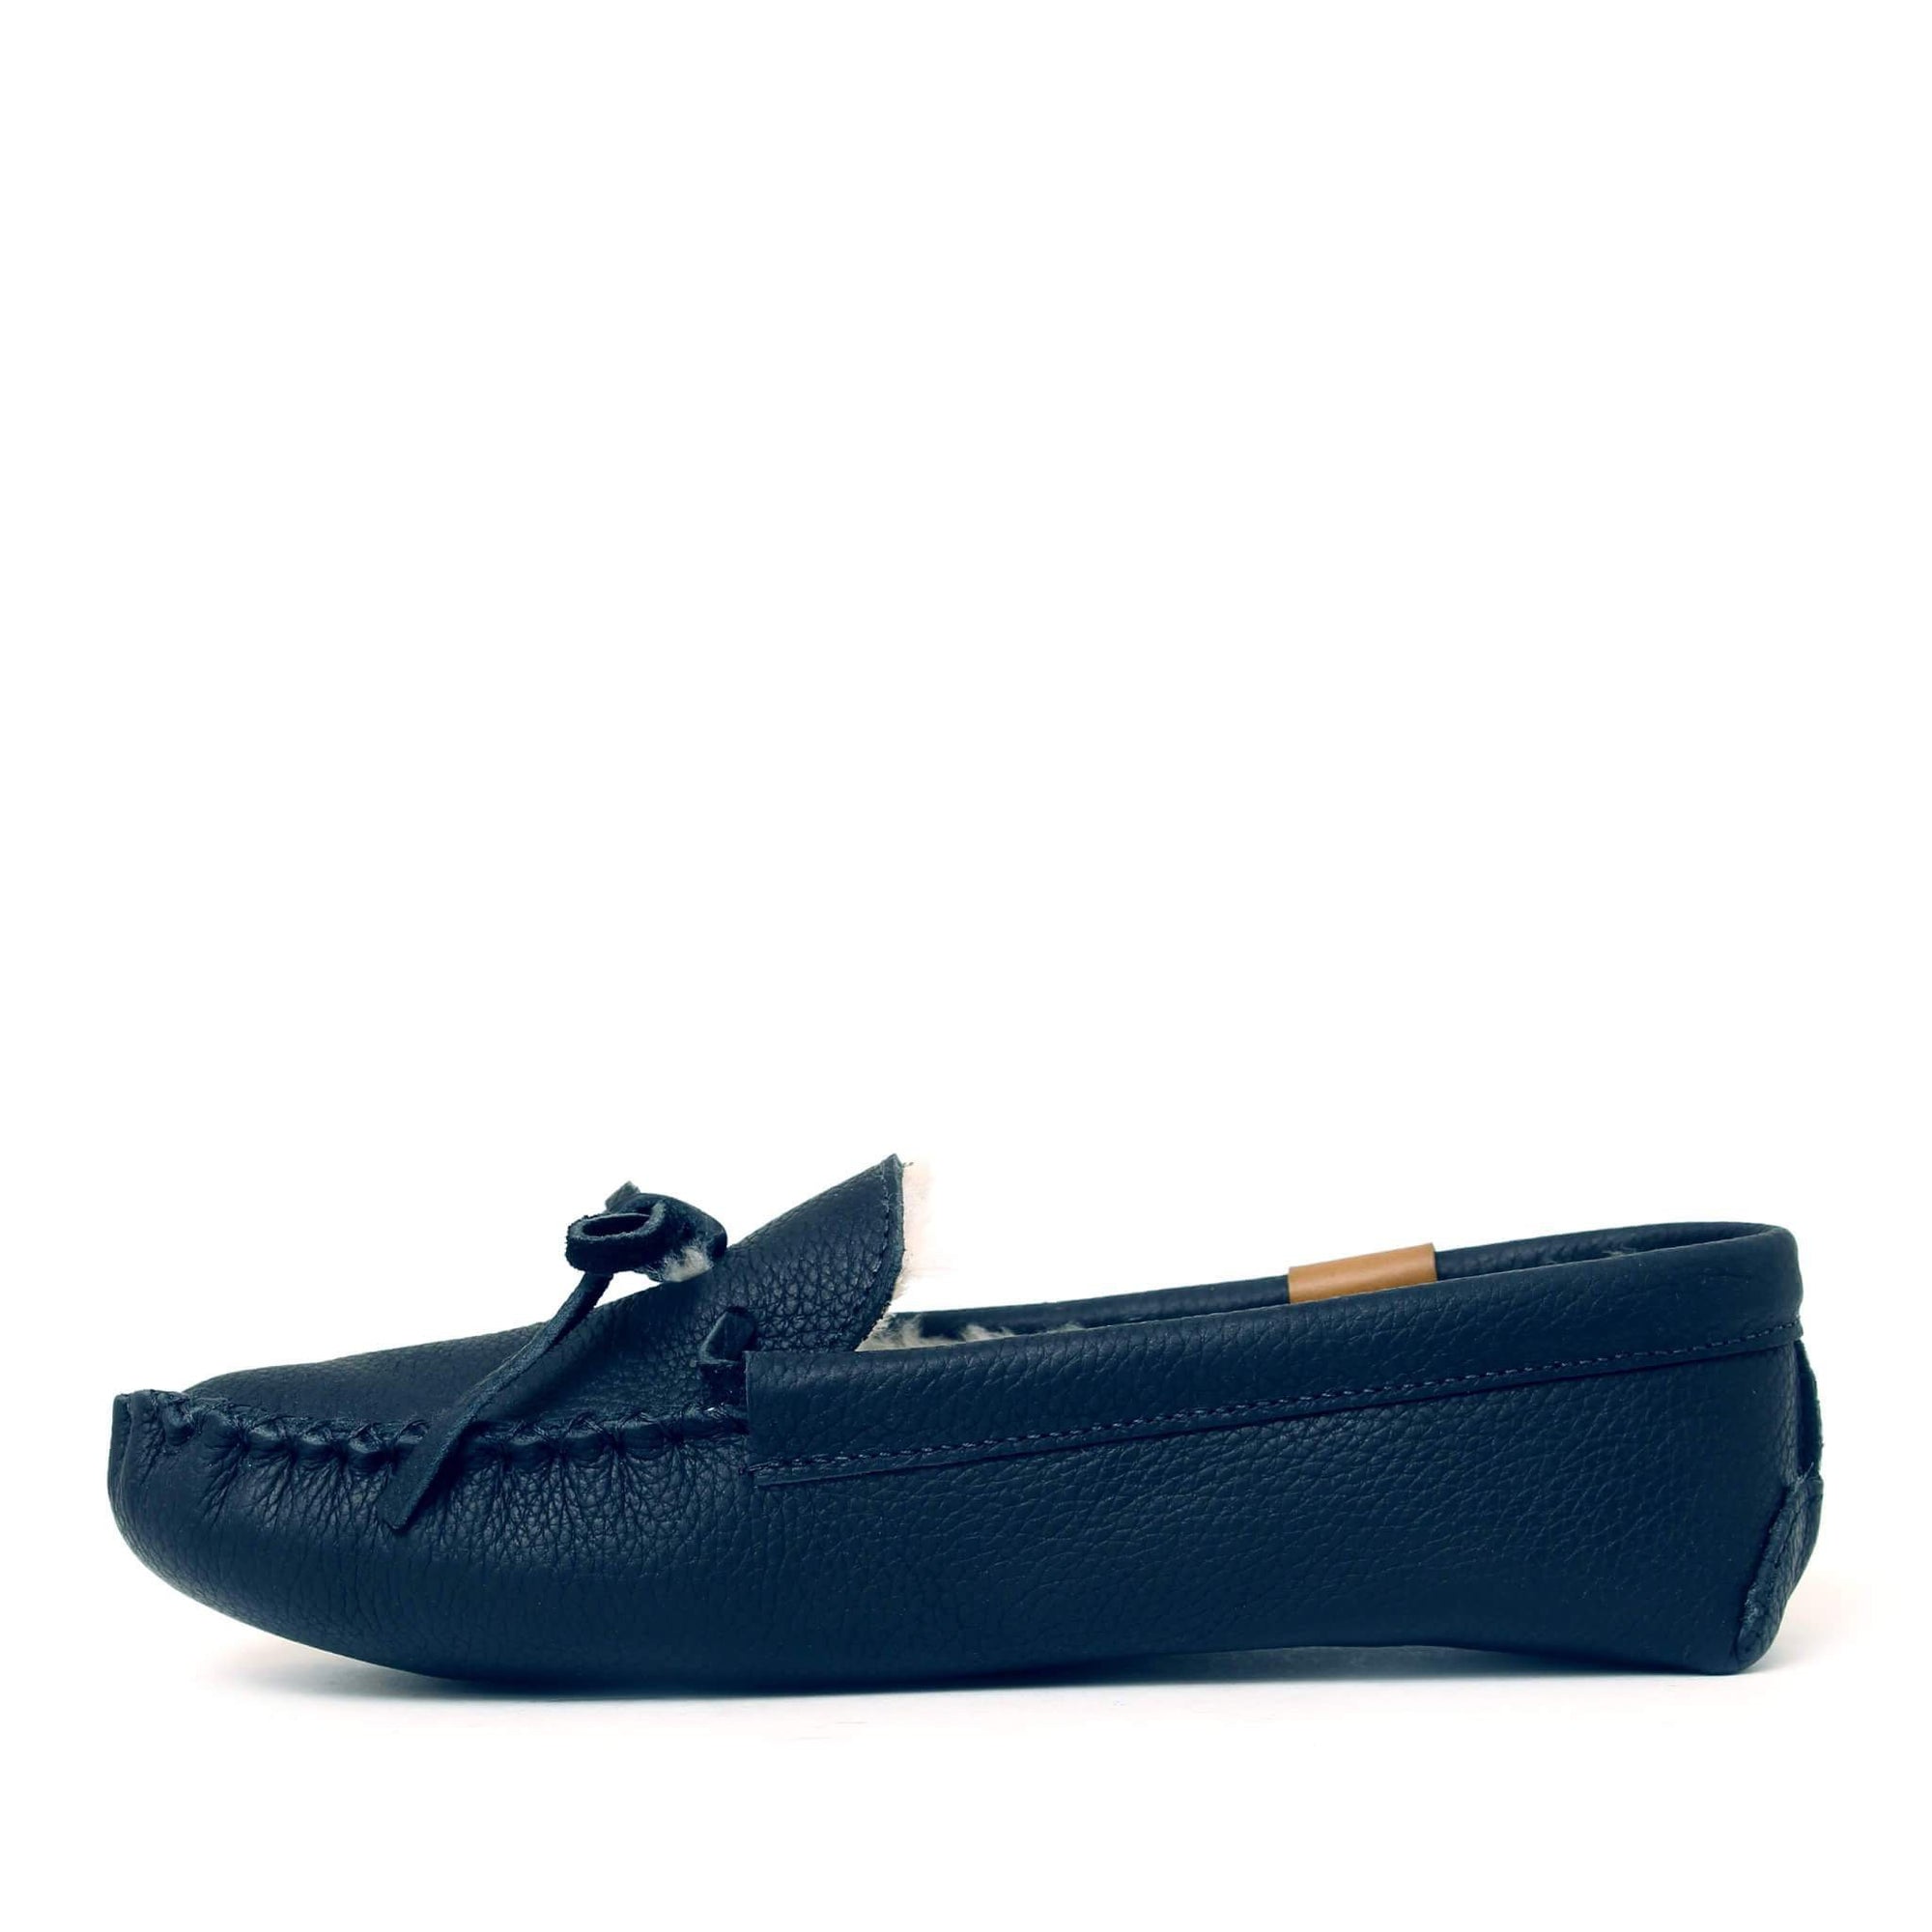 AMIMOC- Lenno grizzly navy moccasin for men